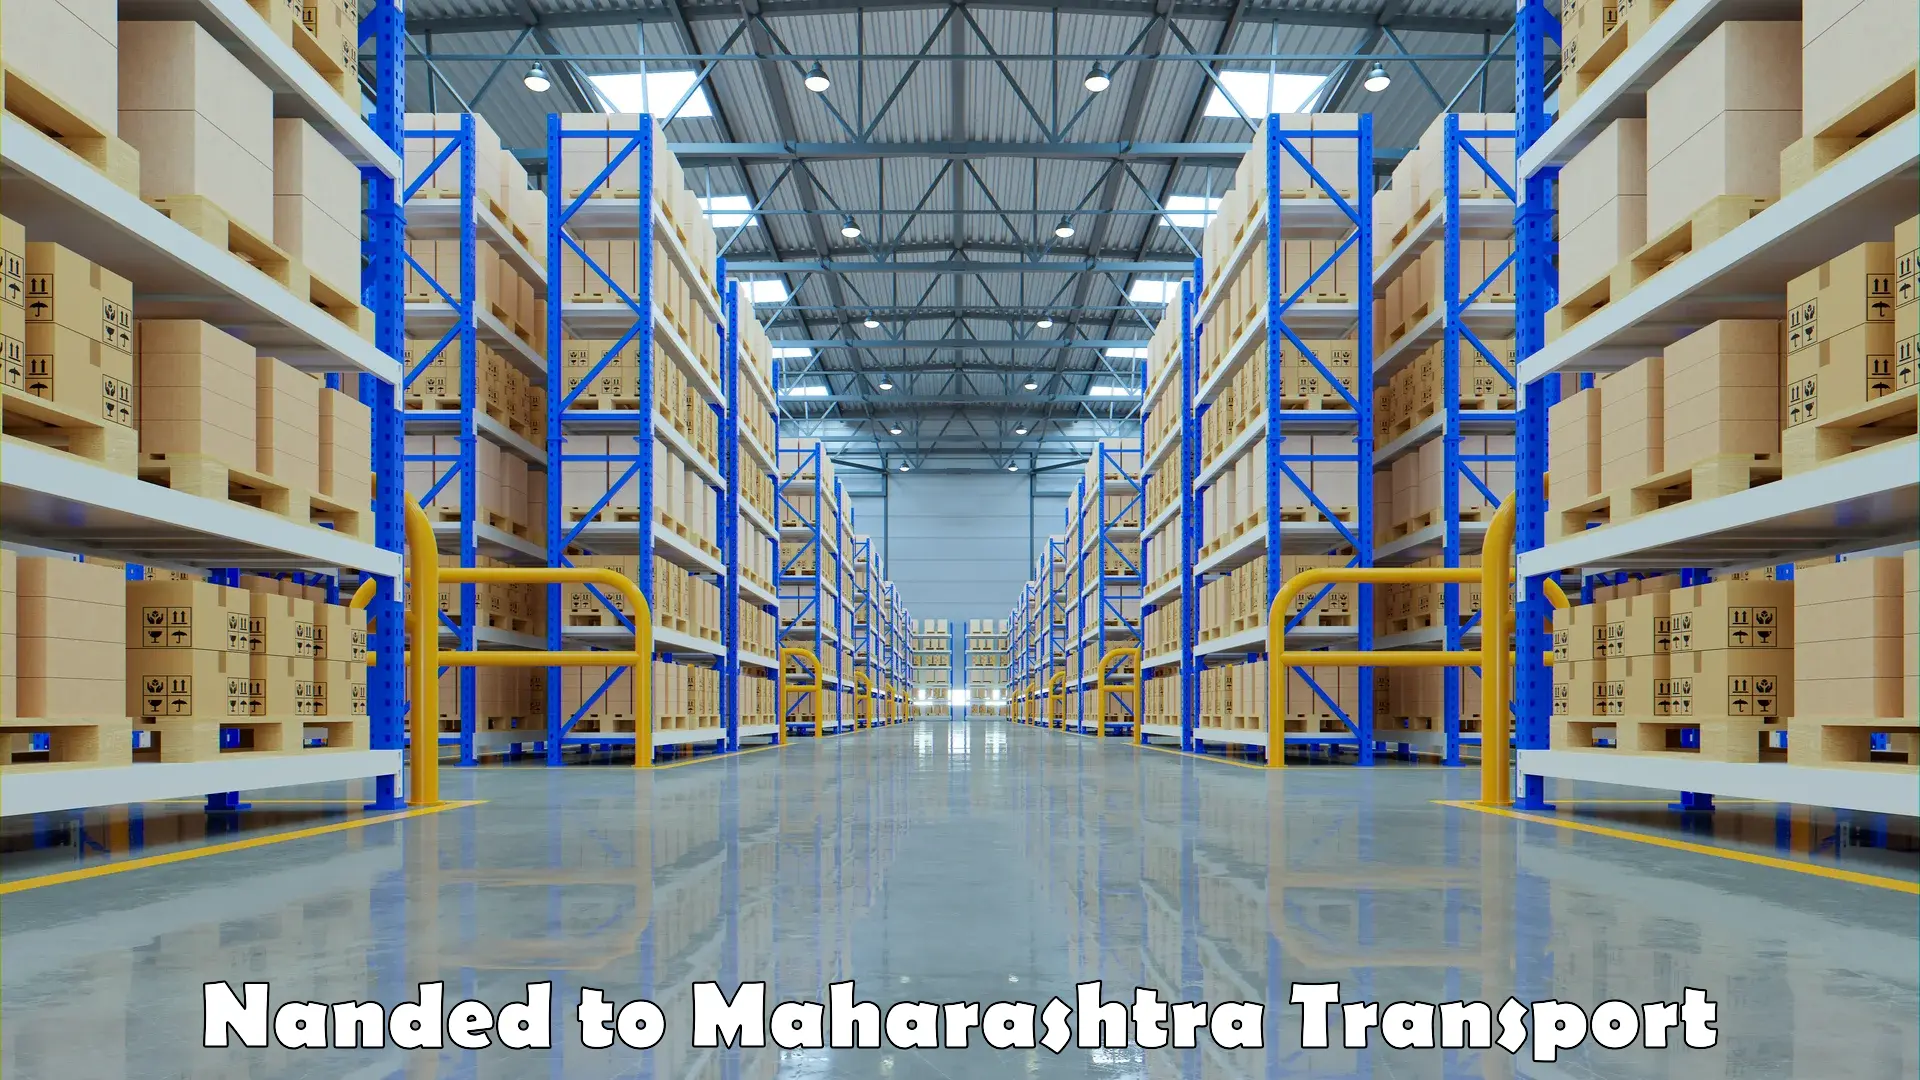 Truck transport companies in India Nanded to Junnar